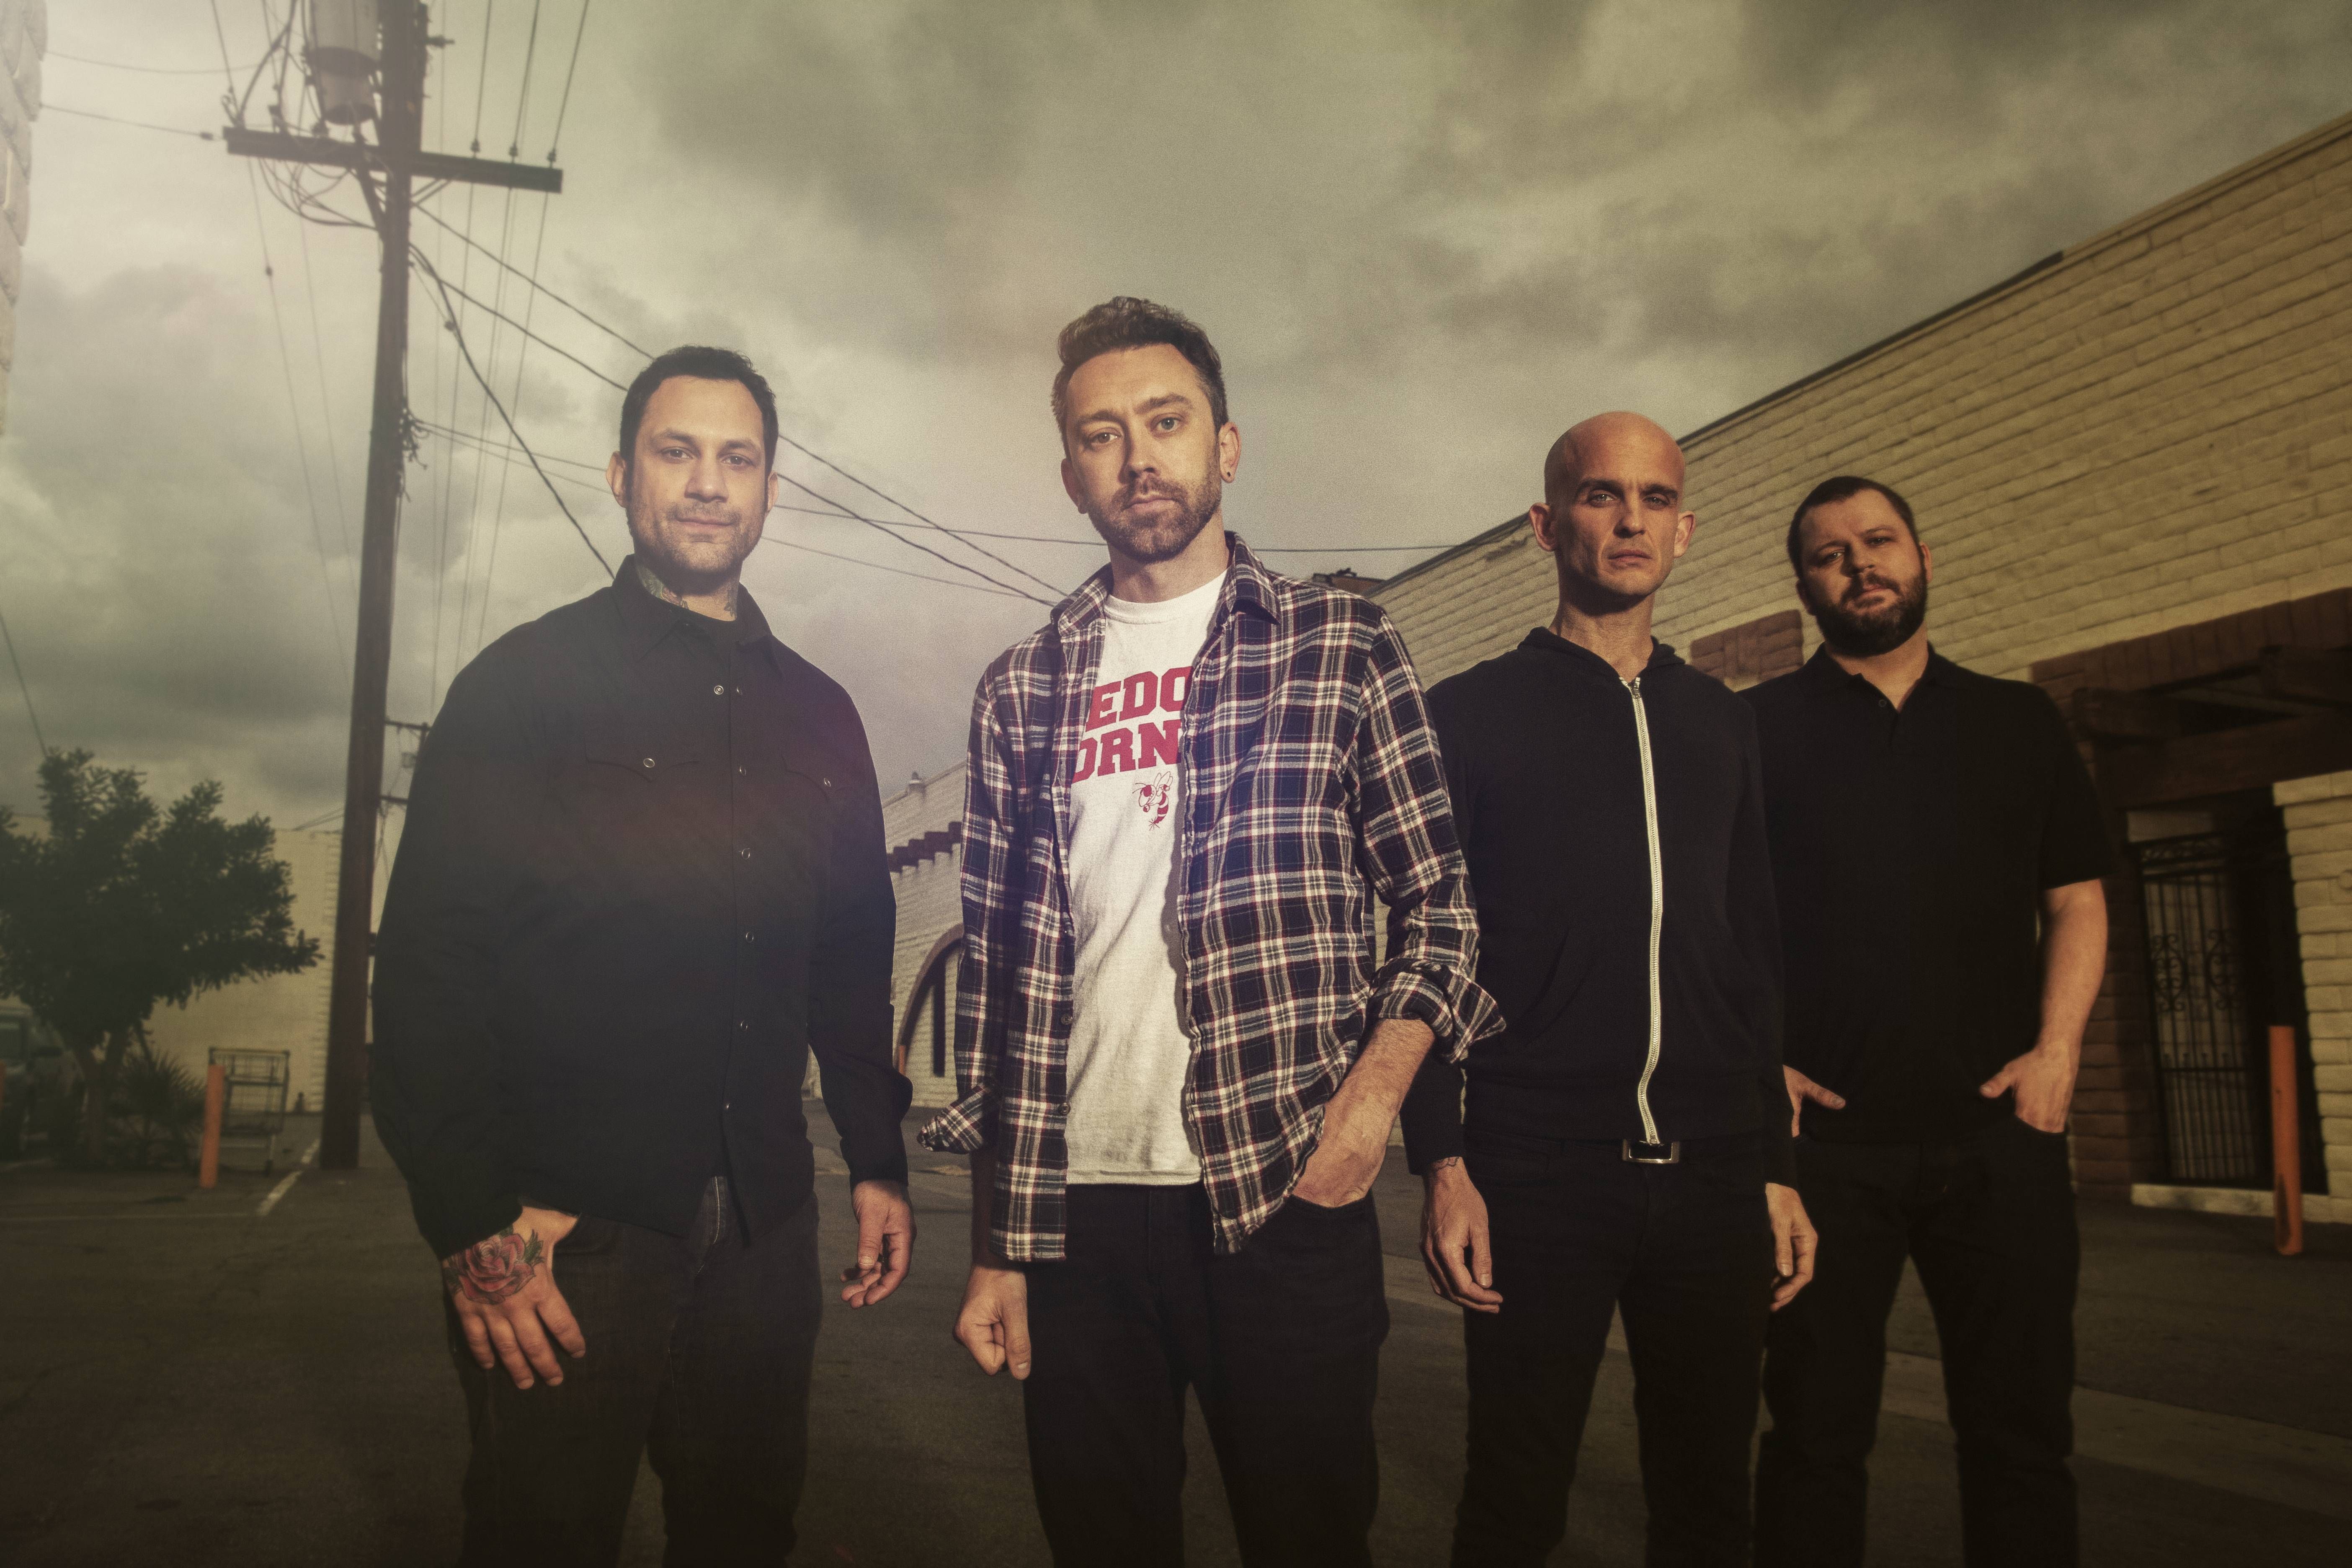 Amazing Rise Against Pictures & Backgrounds